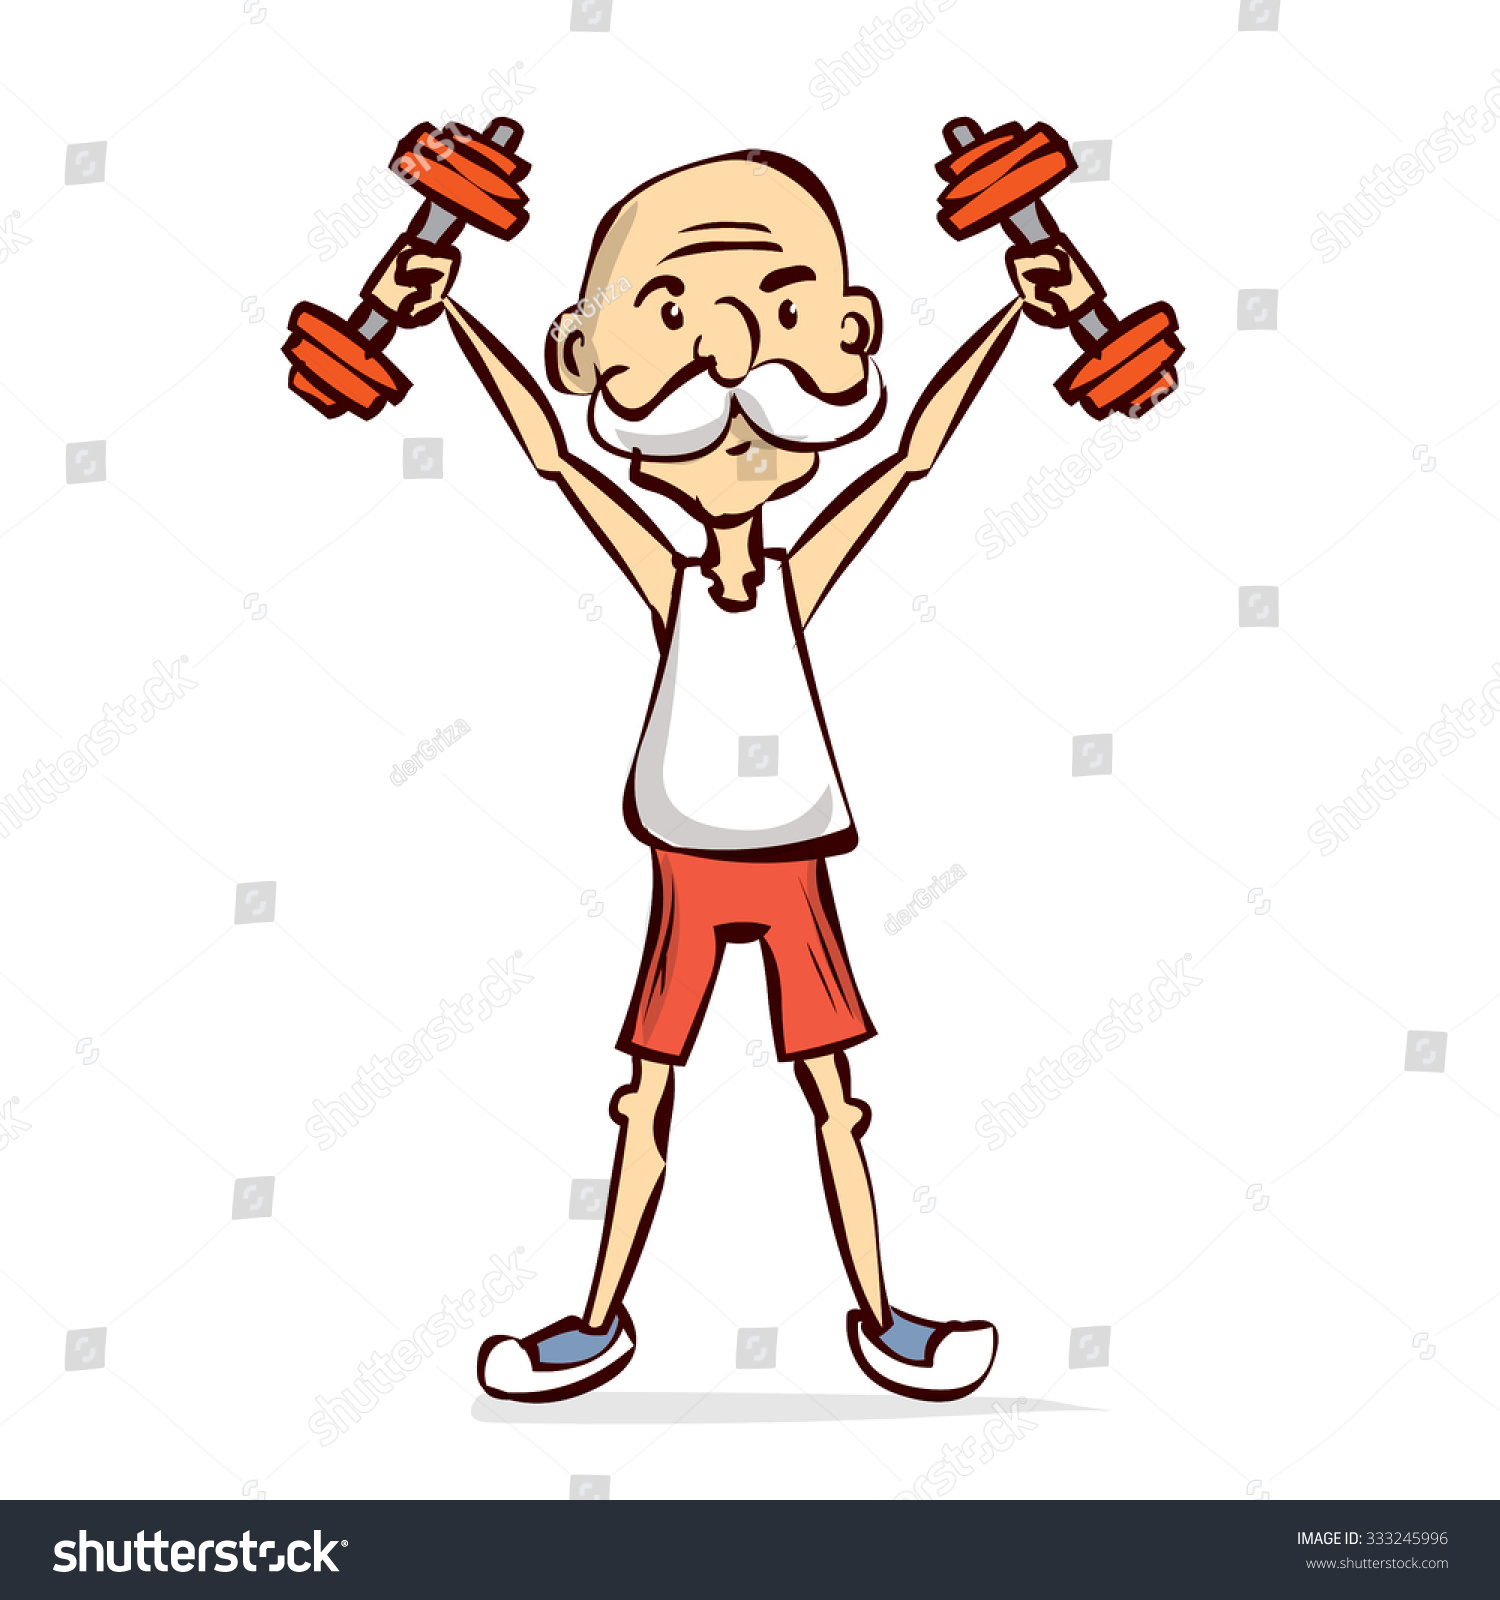 funny exercise clip art - photo #40